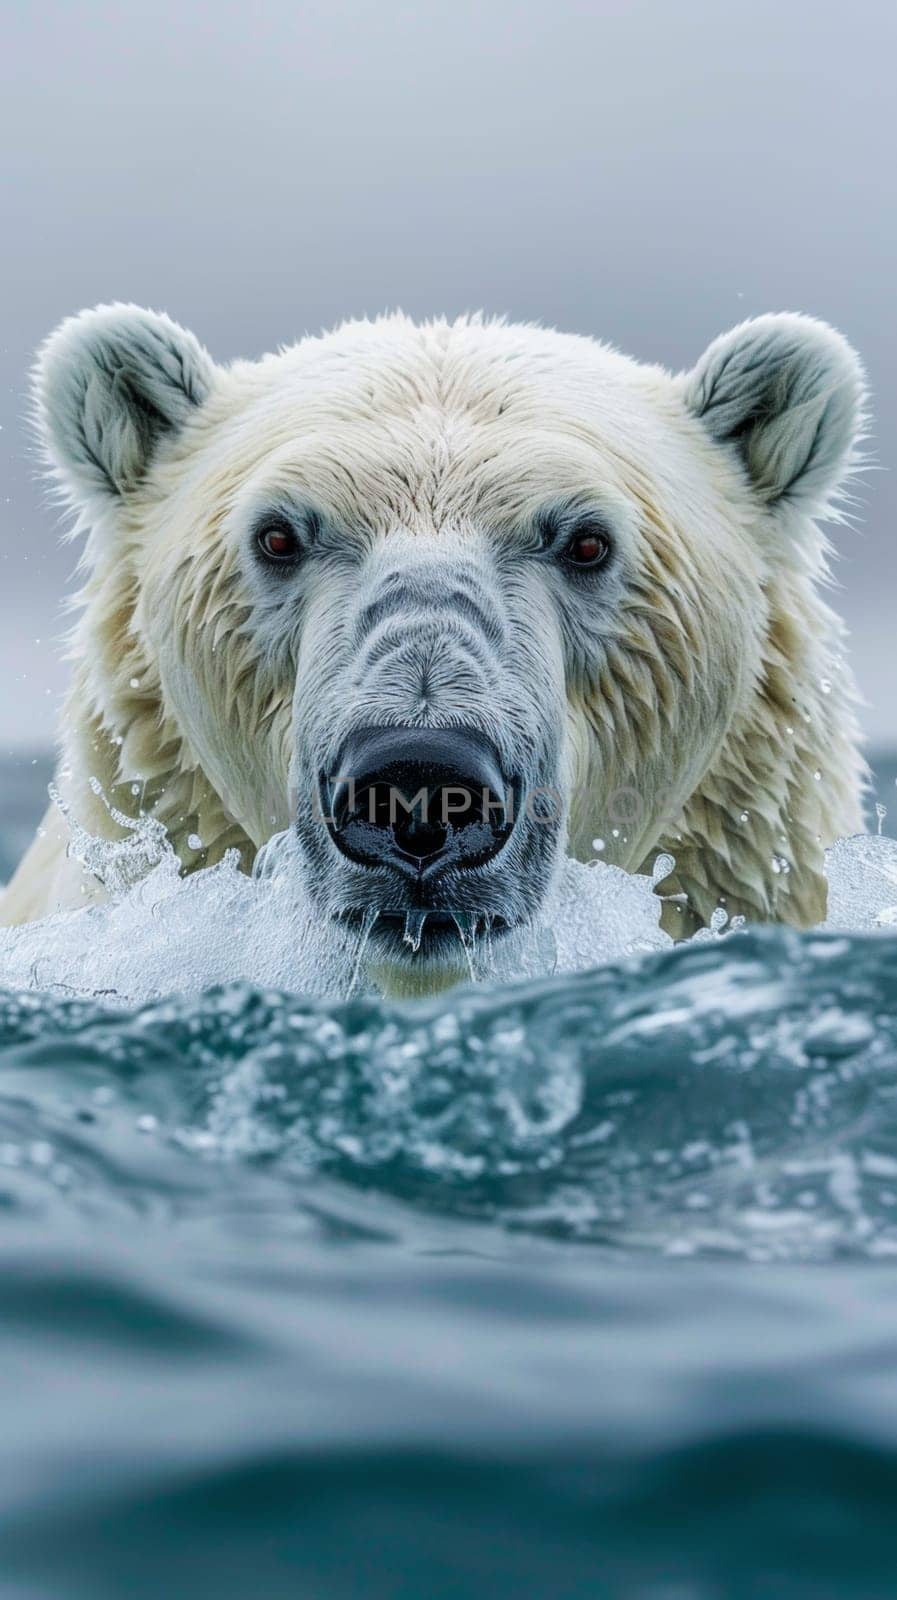 A polar bear swimming in the ocean with its head above water